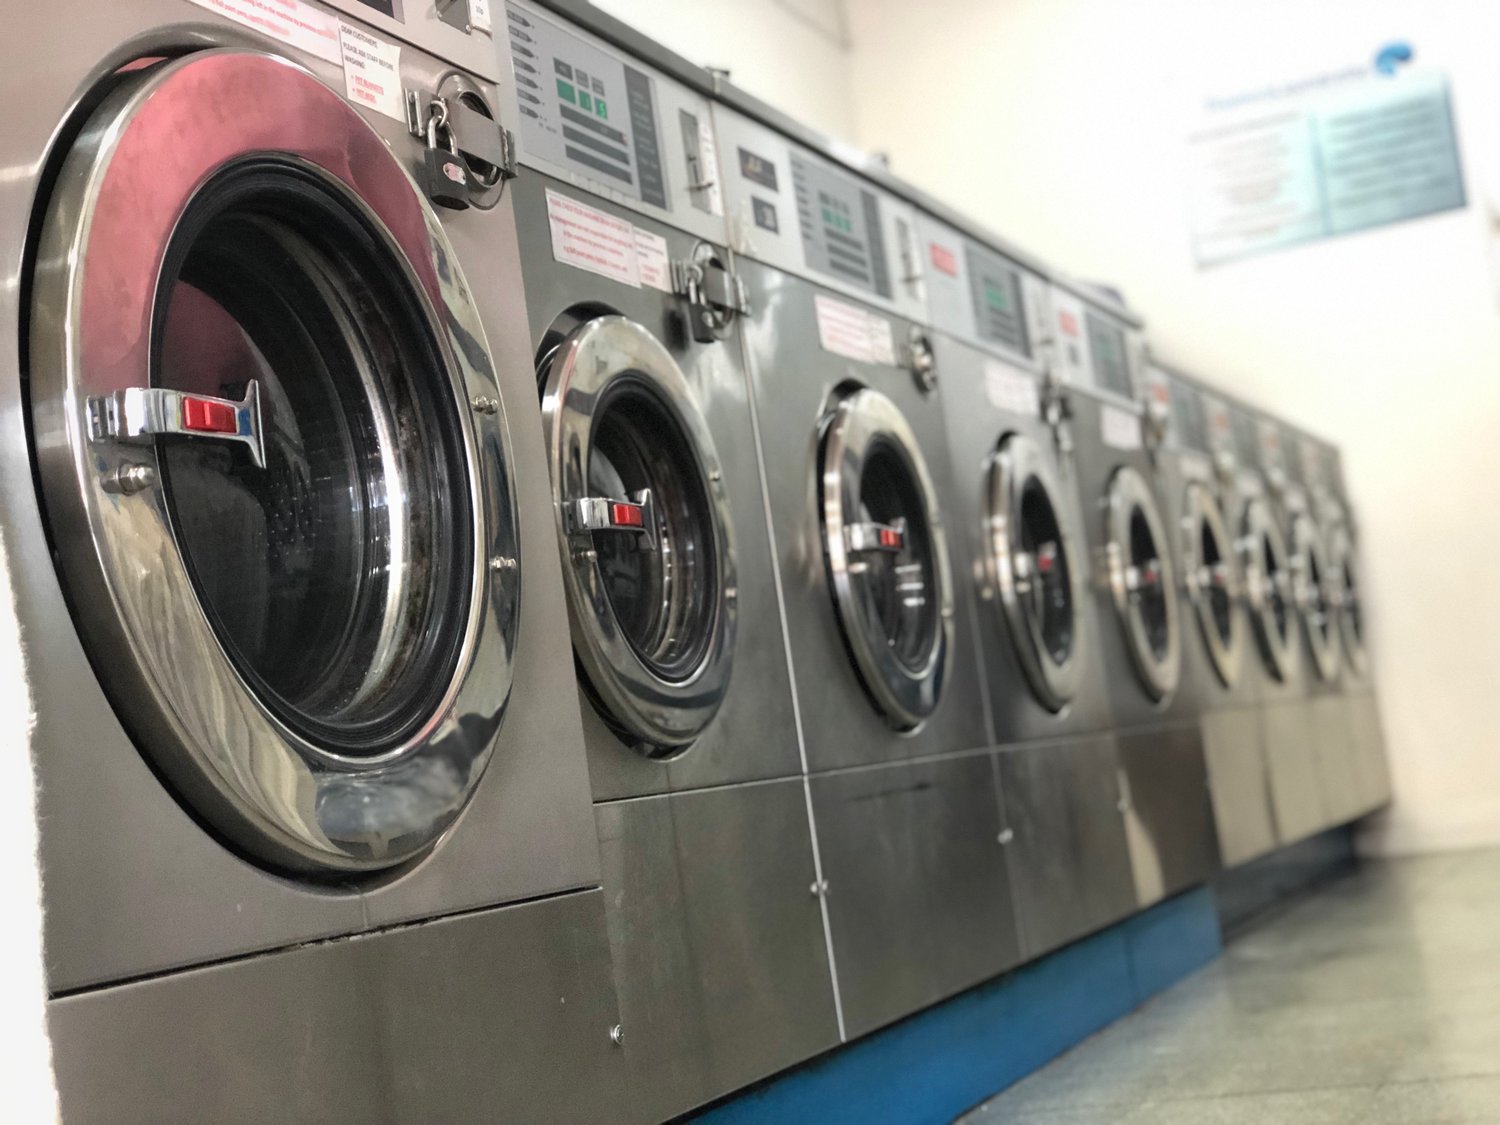 Self Service Laundry & Prices | Thames Laundrette & Dry Cleaning Ltd